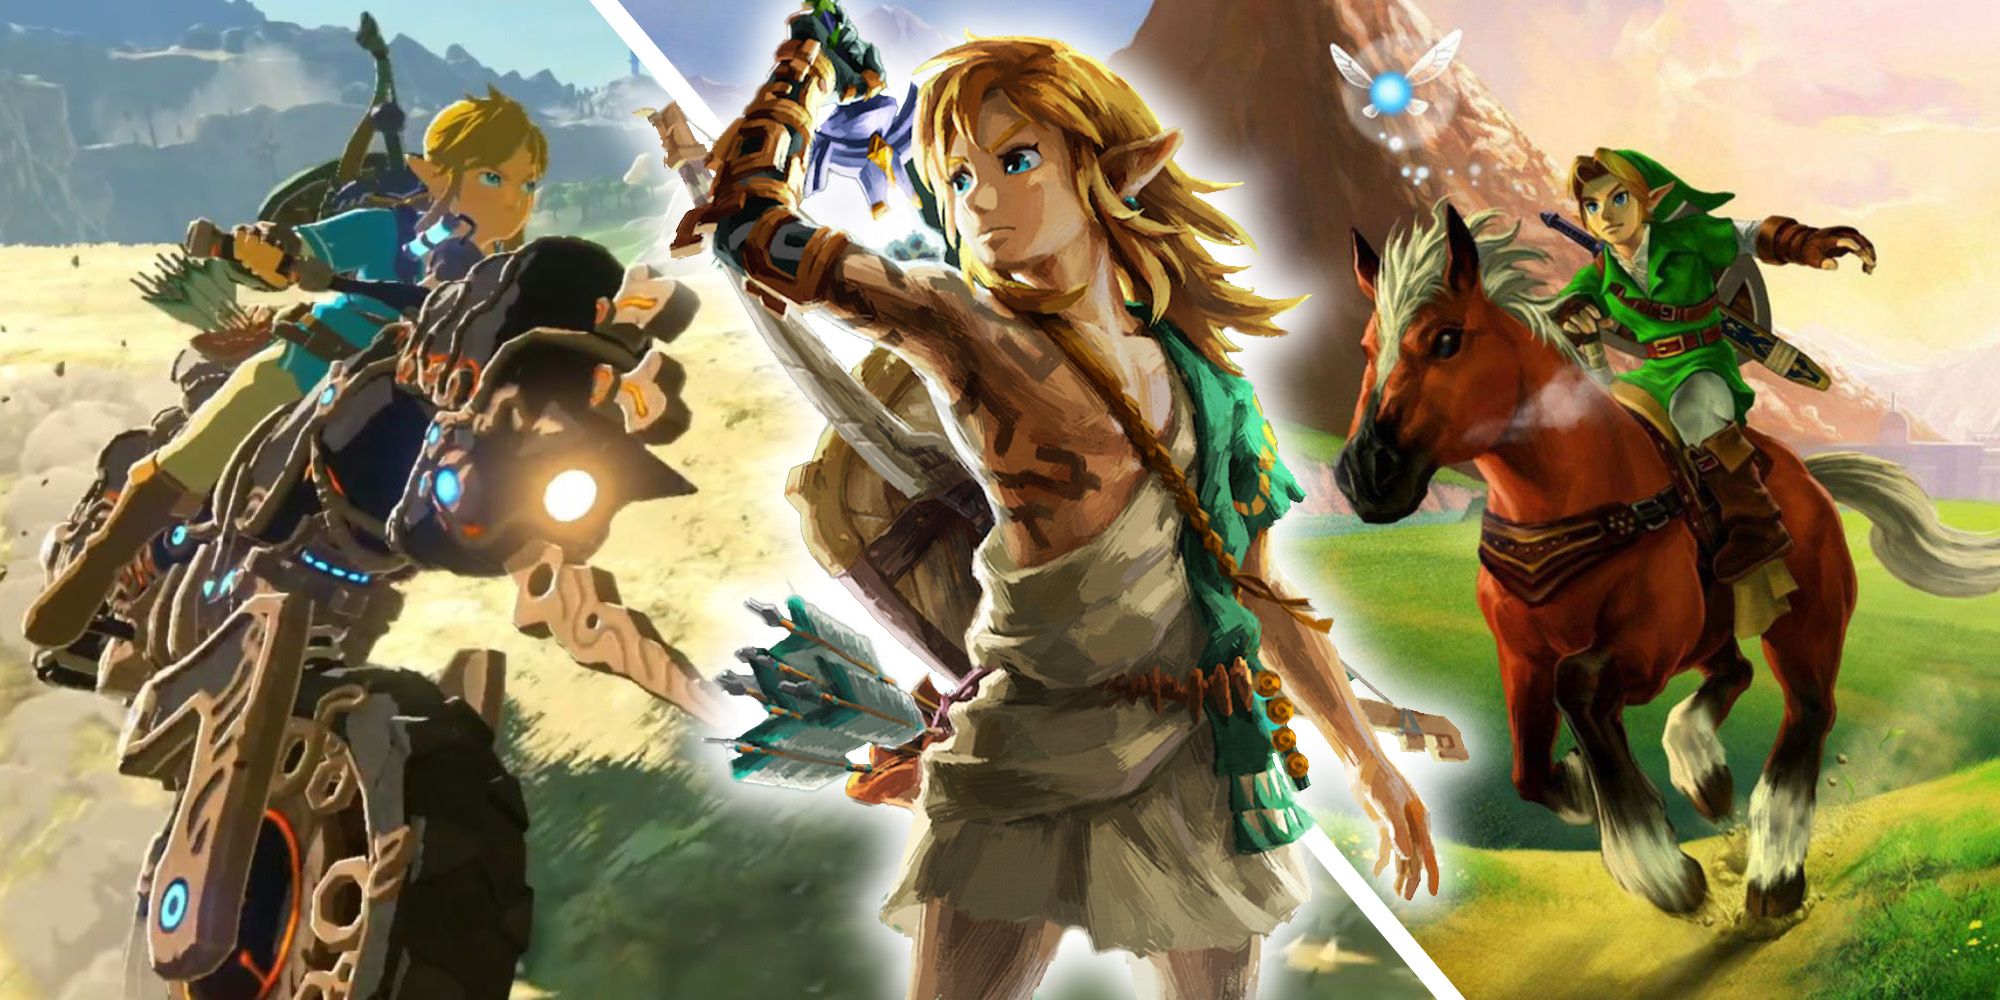 The Legend Of Zelda - Link From Tears Of The Kingdom, Link On The Master Cycle In Breath Of The Wild, And Link On Epona In Ocarina Of Time 3D